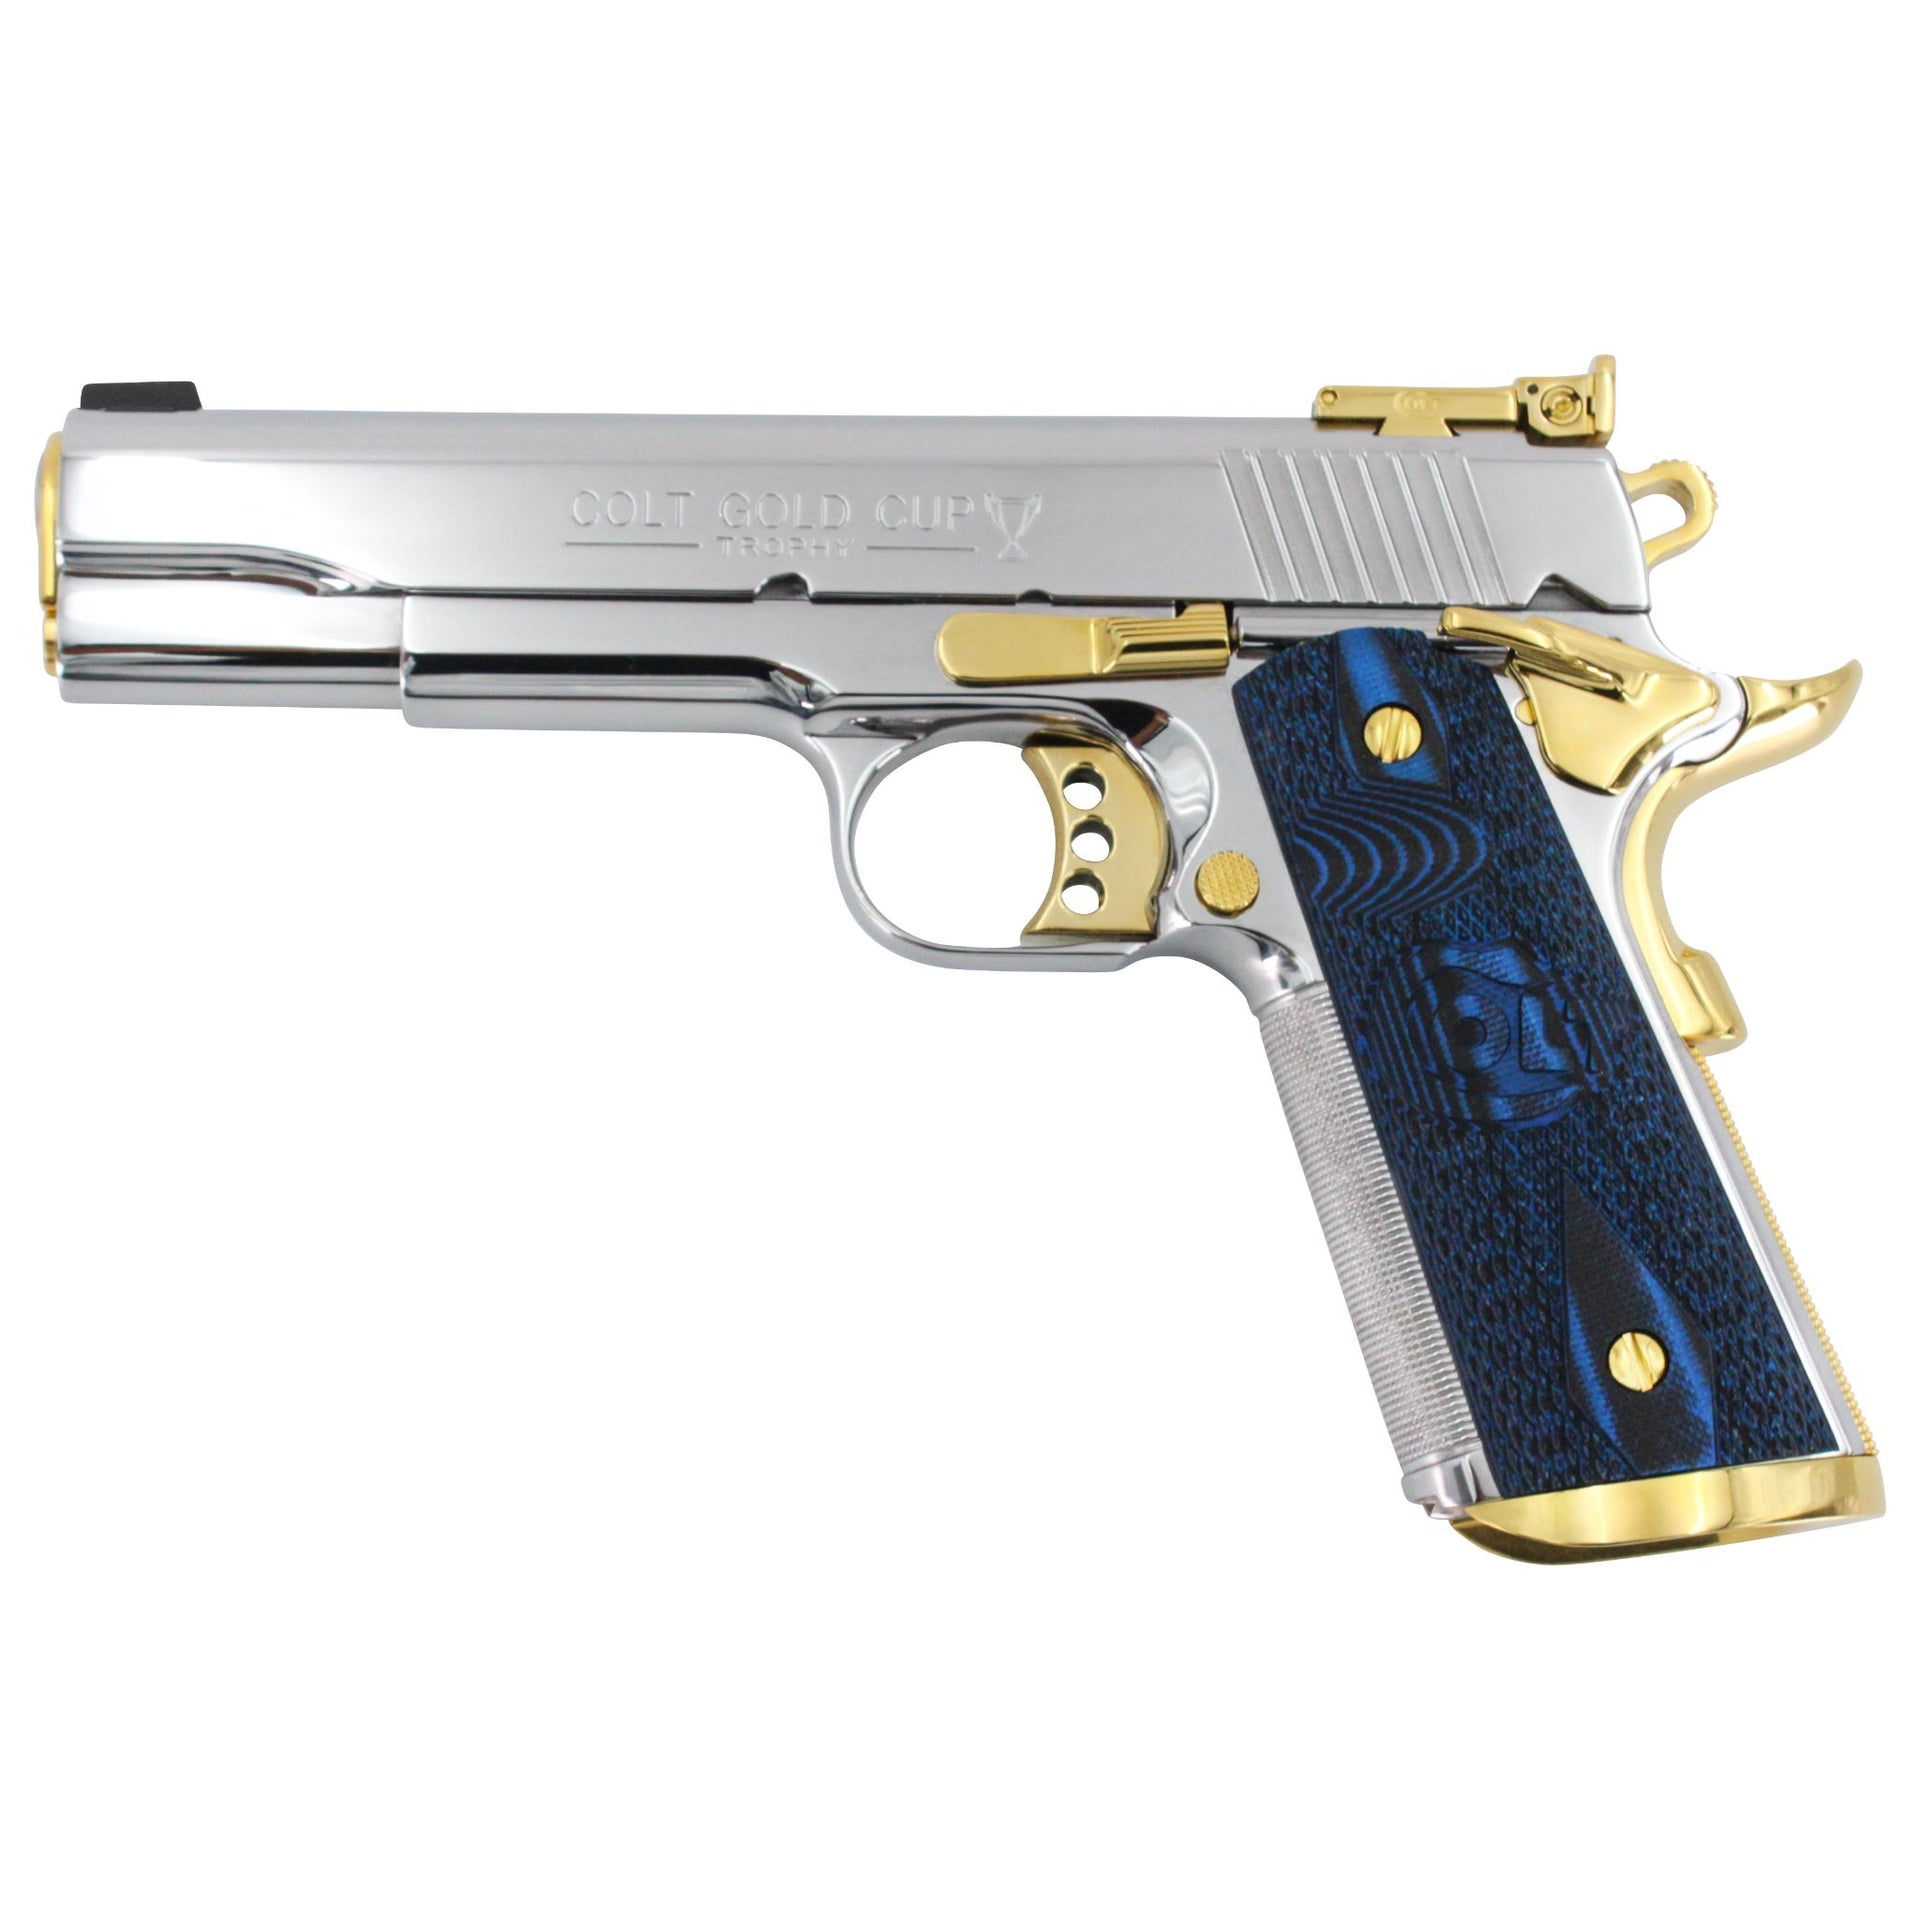 Colt 1911, 45ACP, Gold Cup Trophy, Mirror Polished, Stainless Steel & 24K Gold Accents